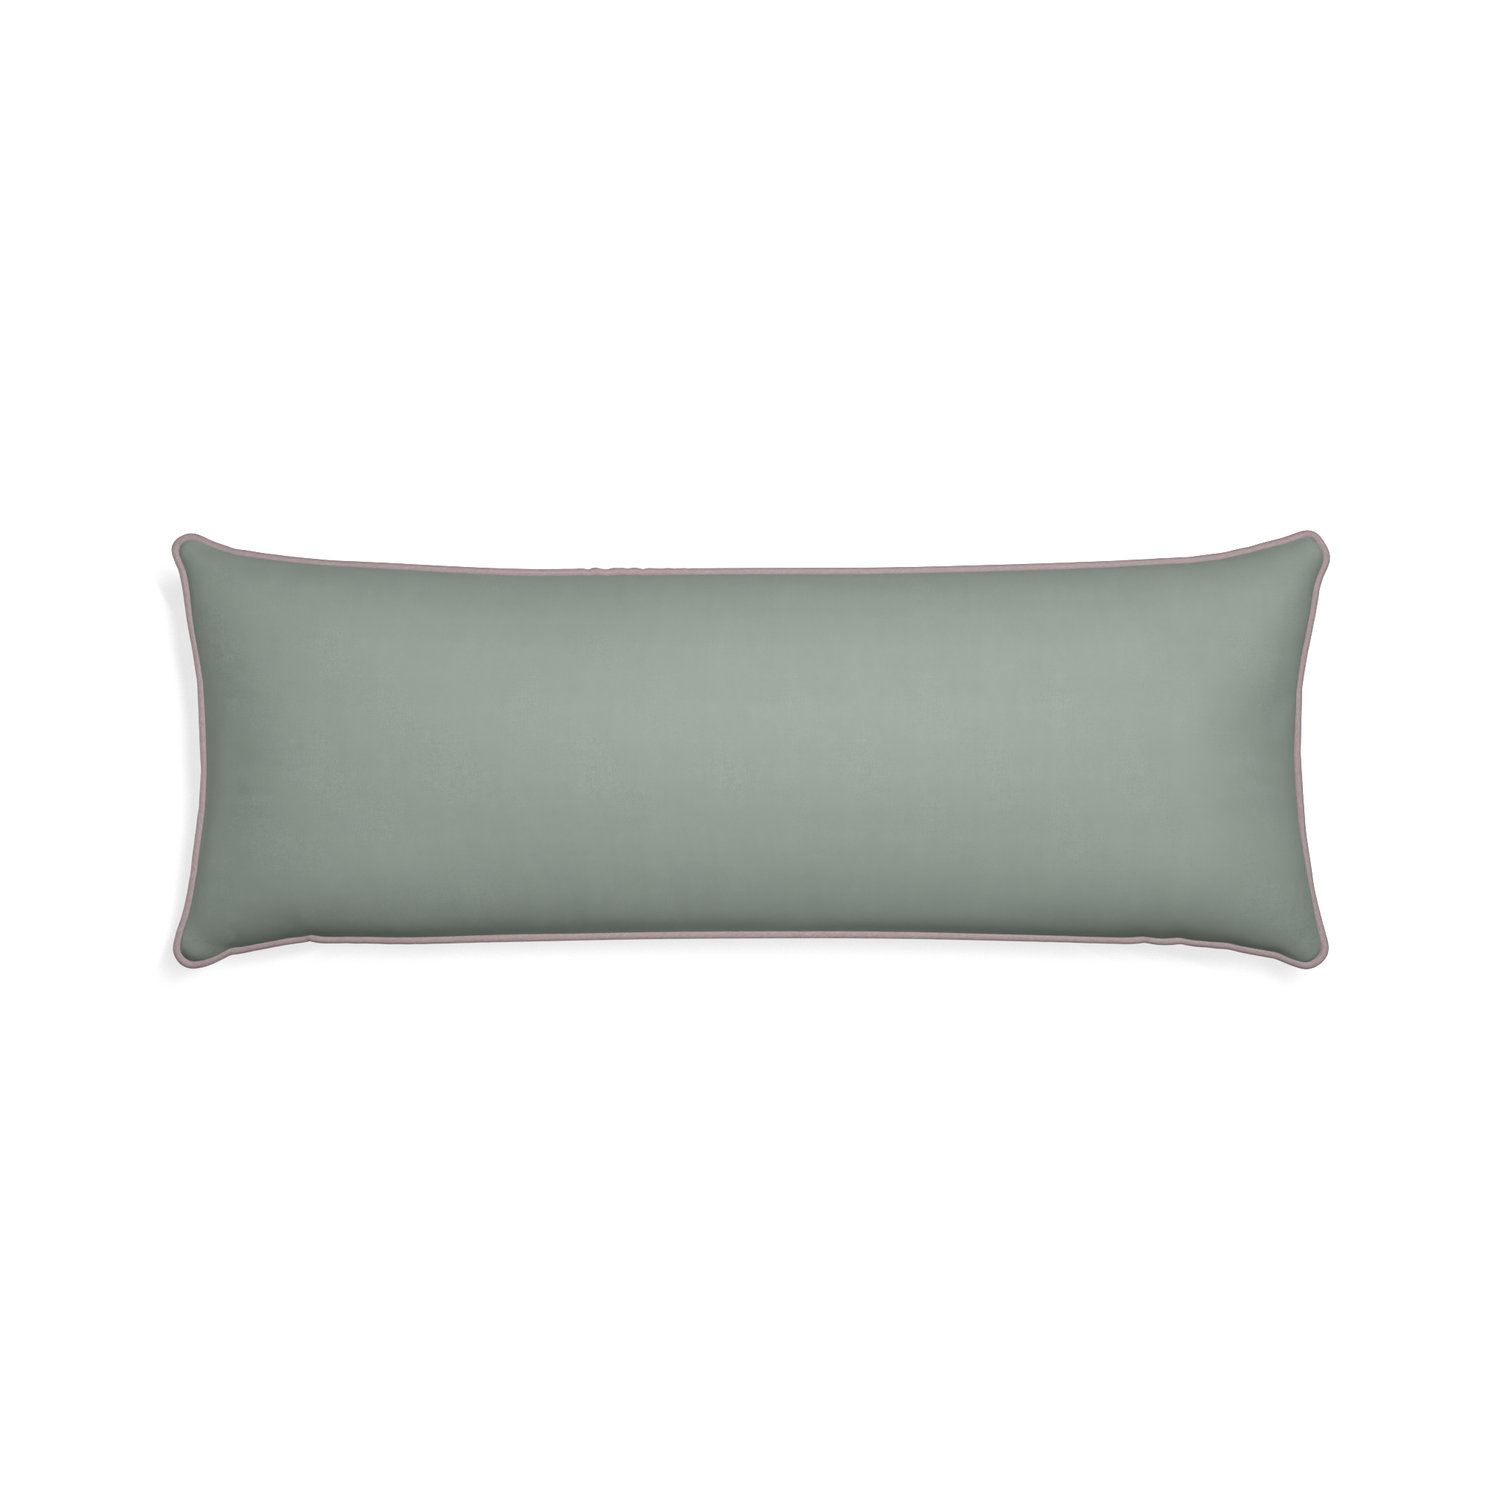 Xl-lumbar sage custom sage green cottonpillow with orchid piping on white background